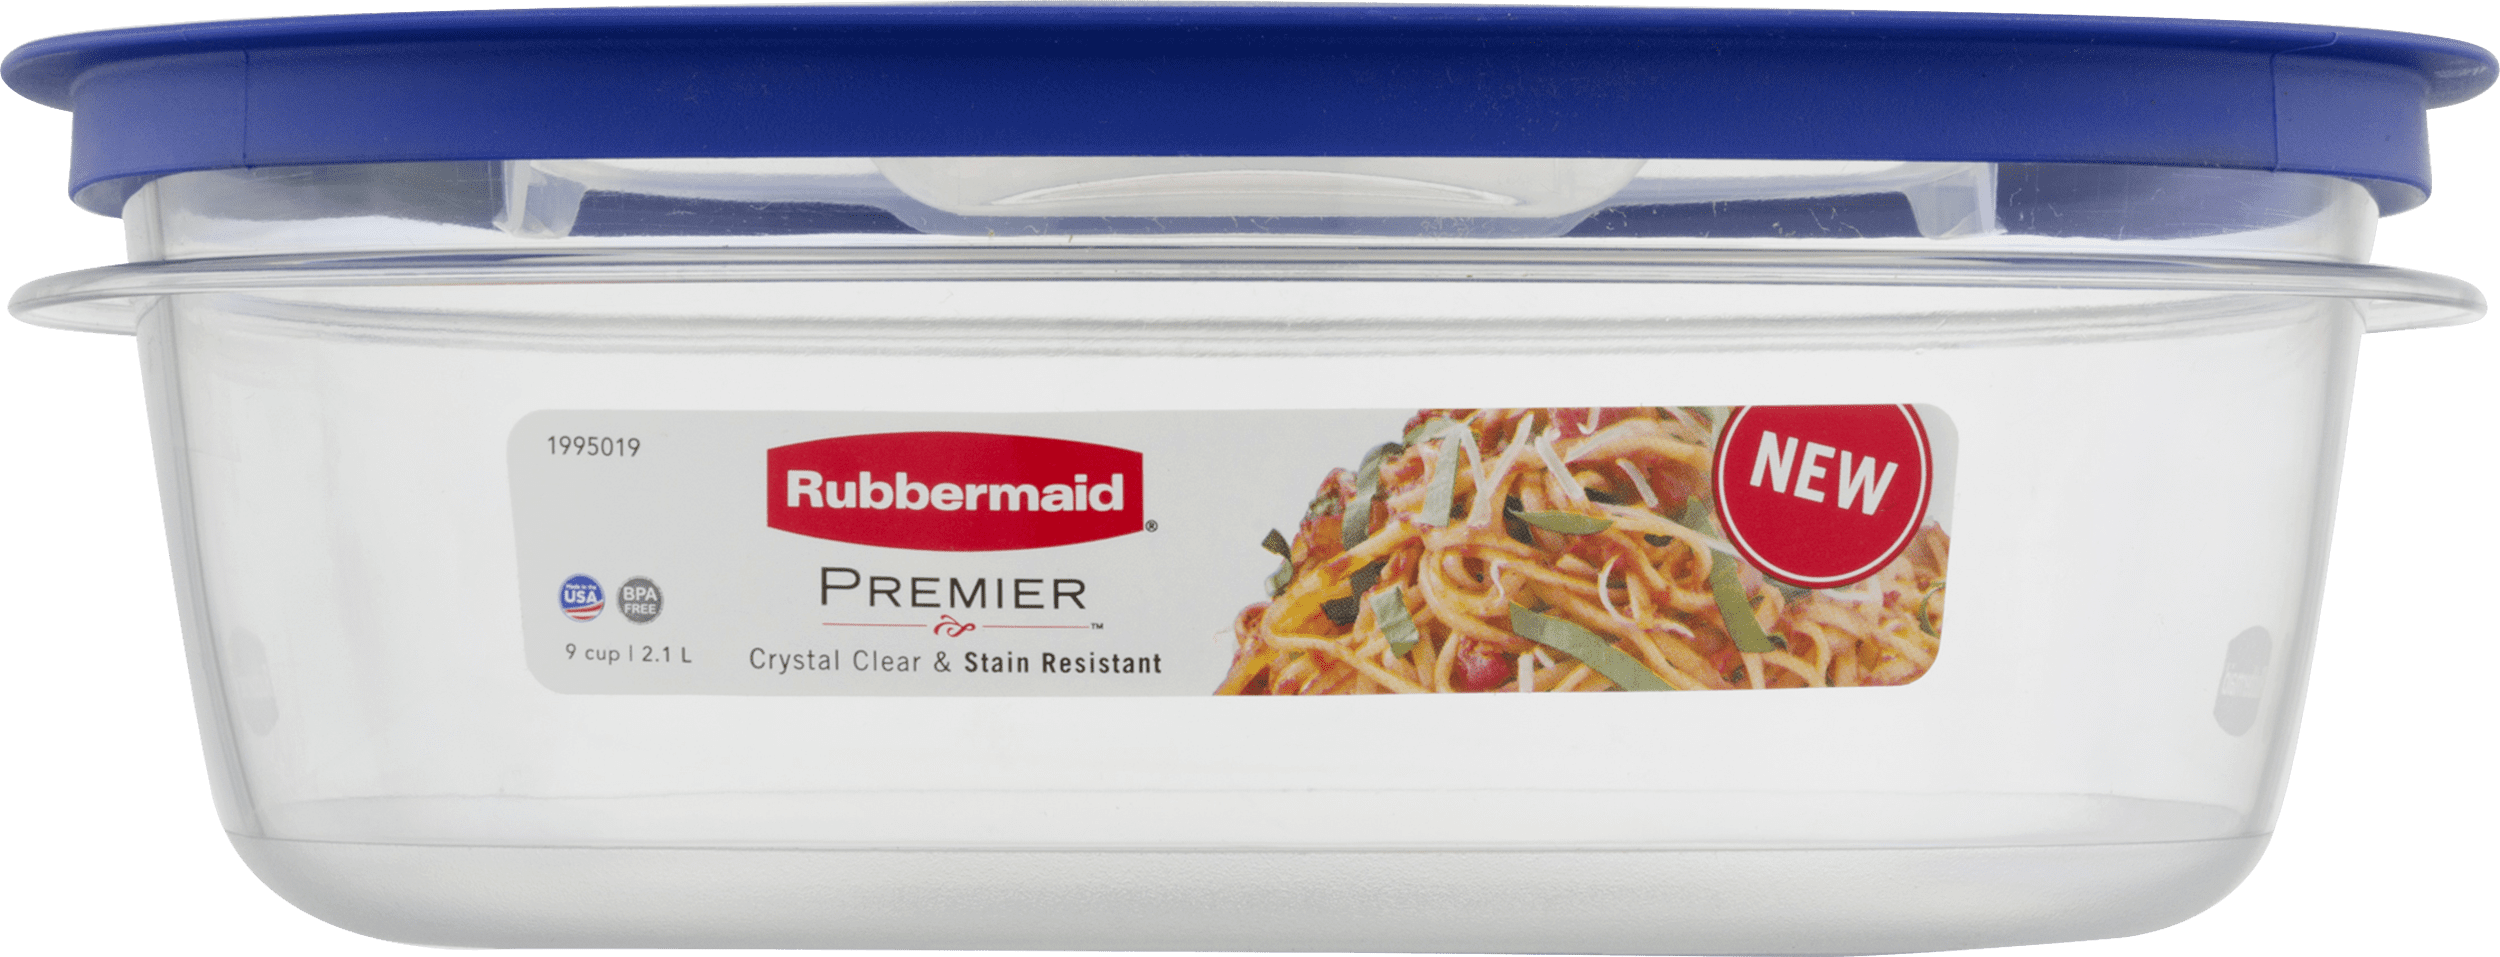 Rubbermaid 2 Cup Premier Resistant Stains Container